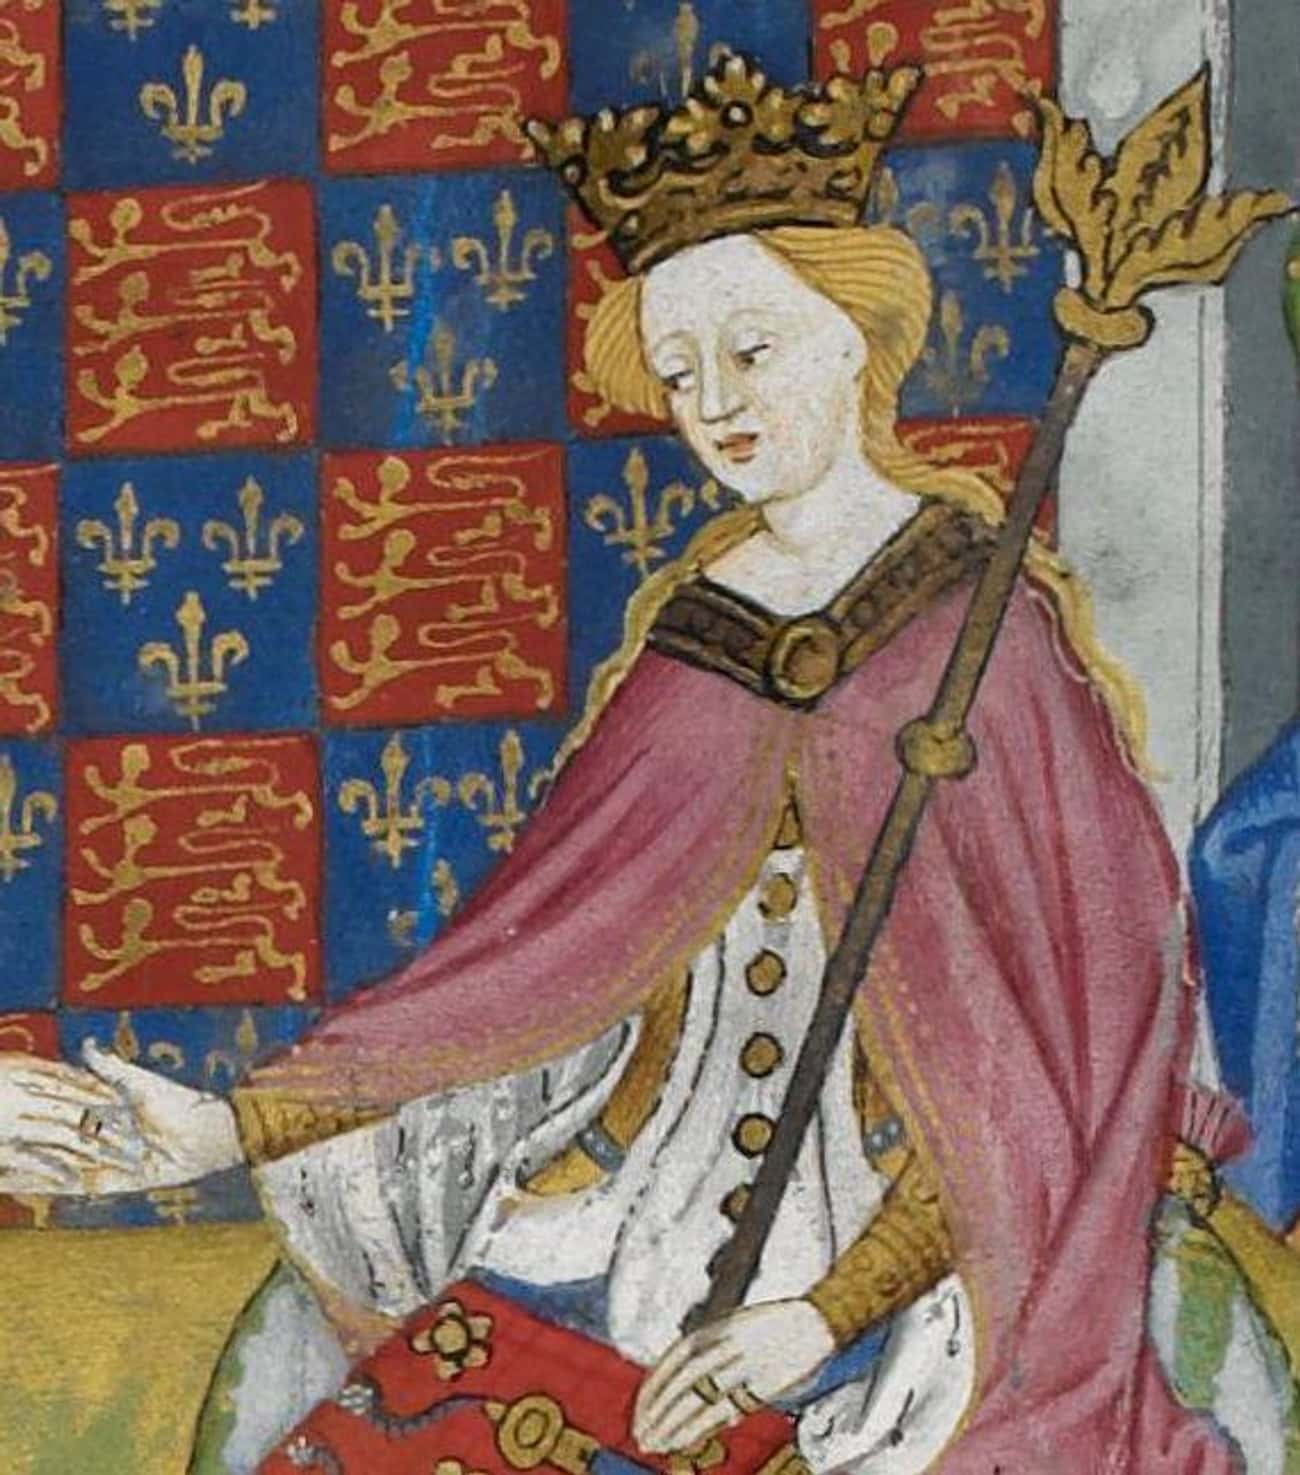 Aries (March 21 - April 19): Margaret of Anjou